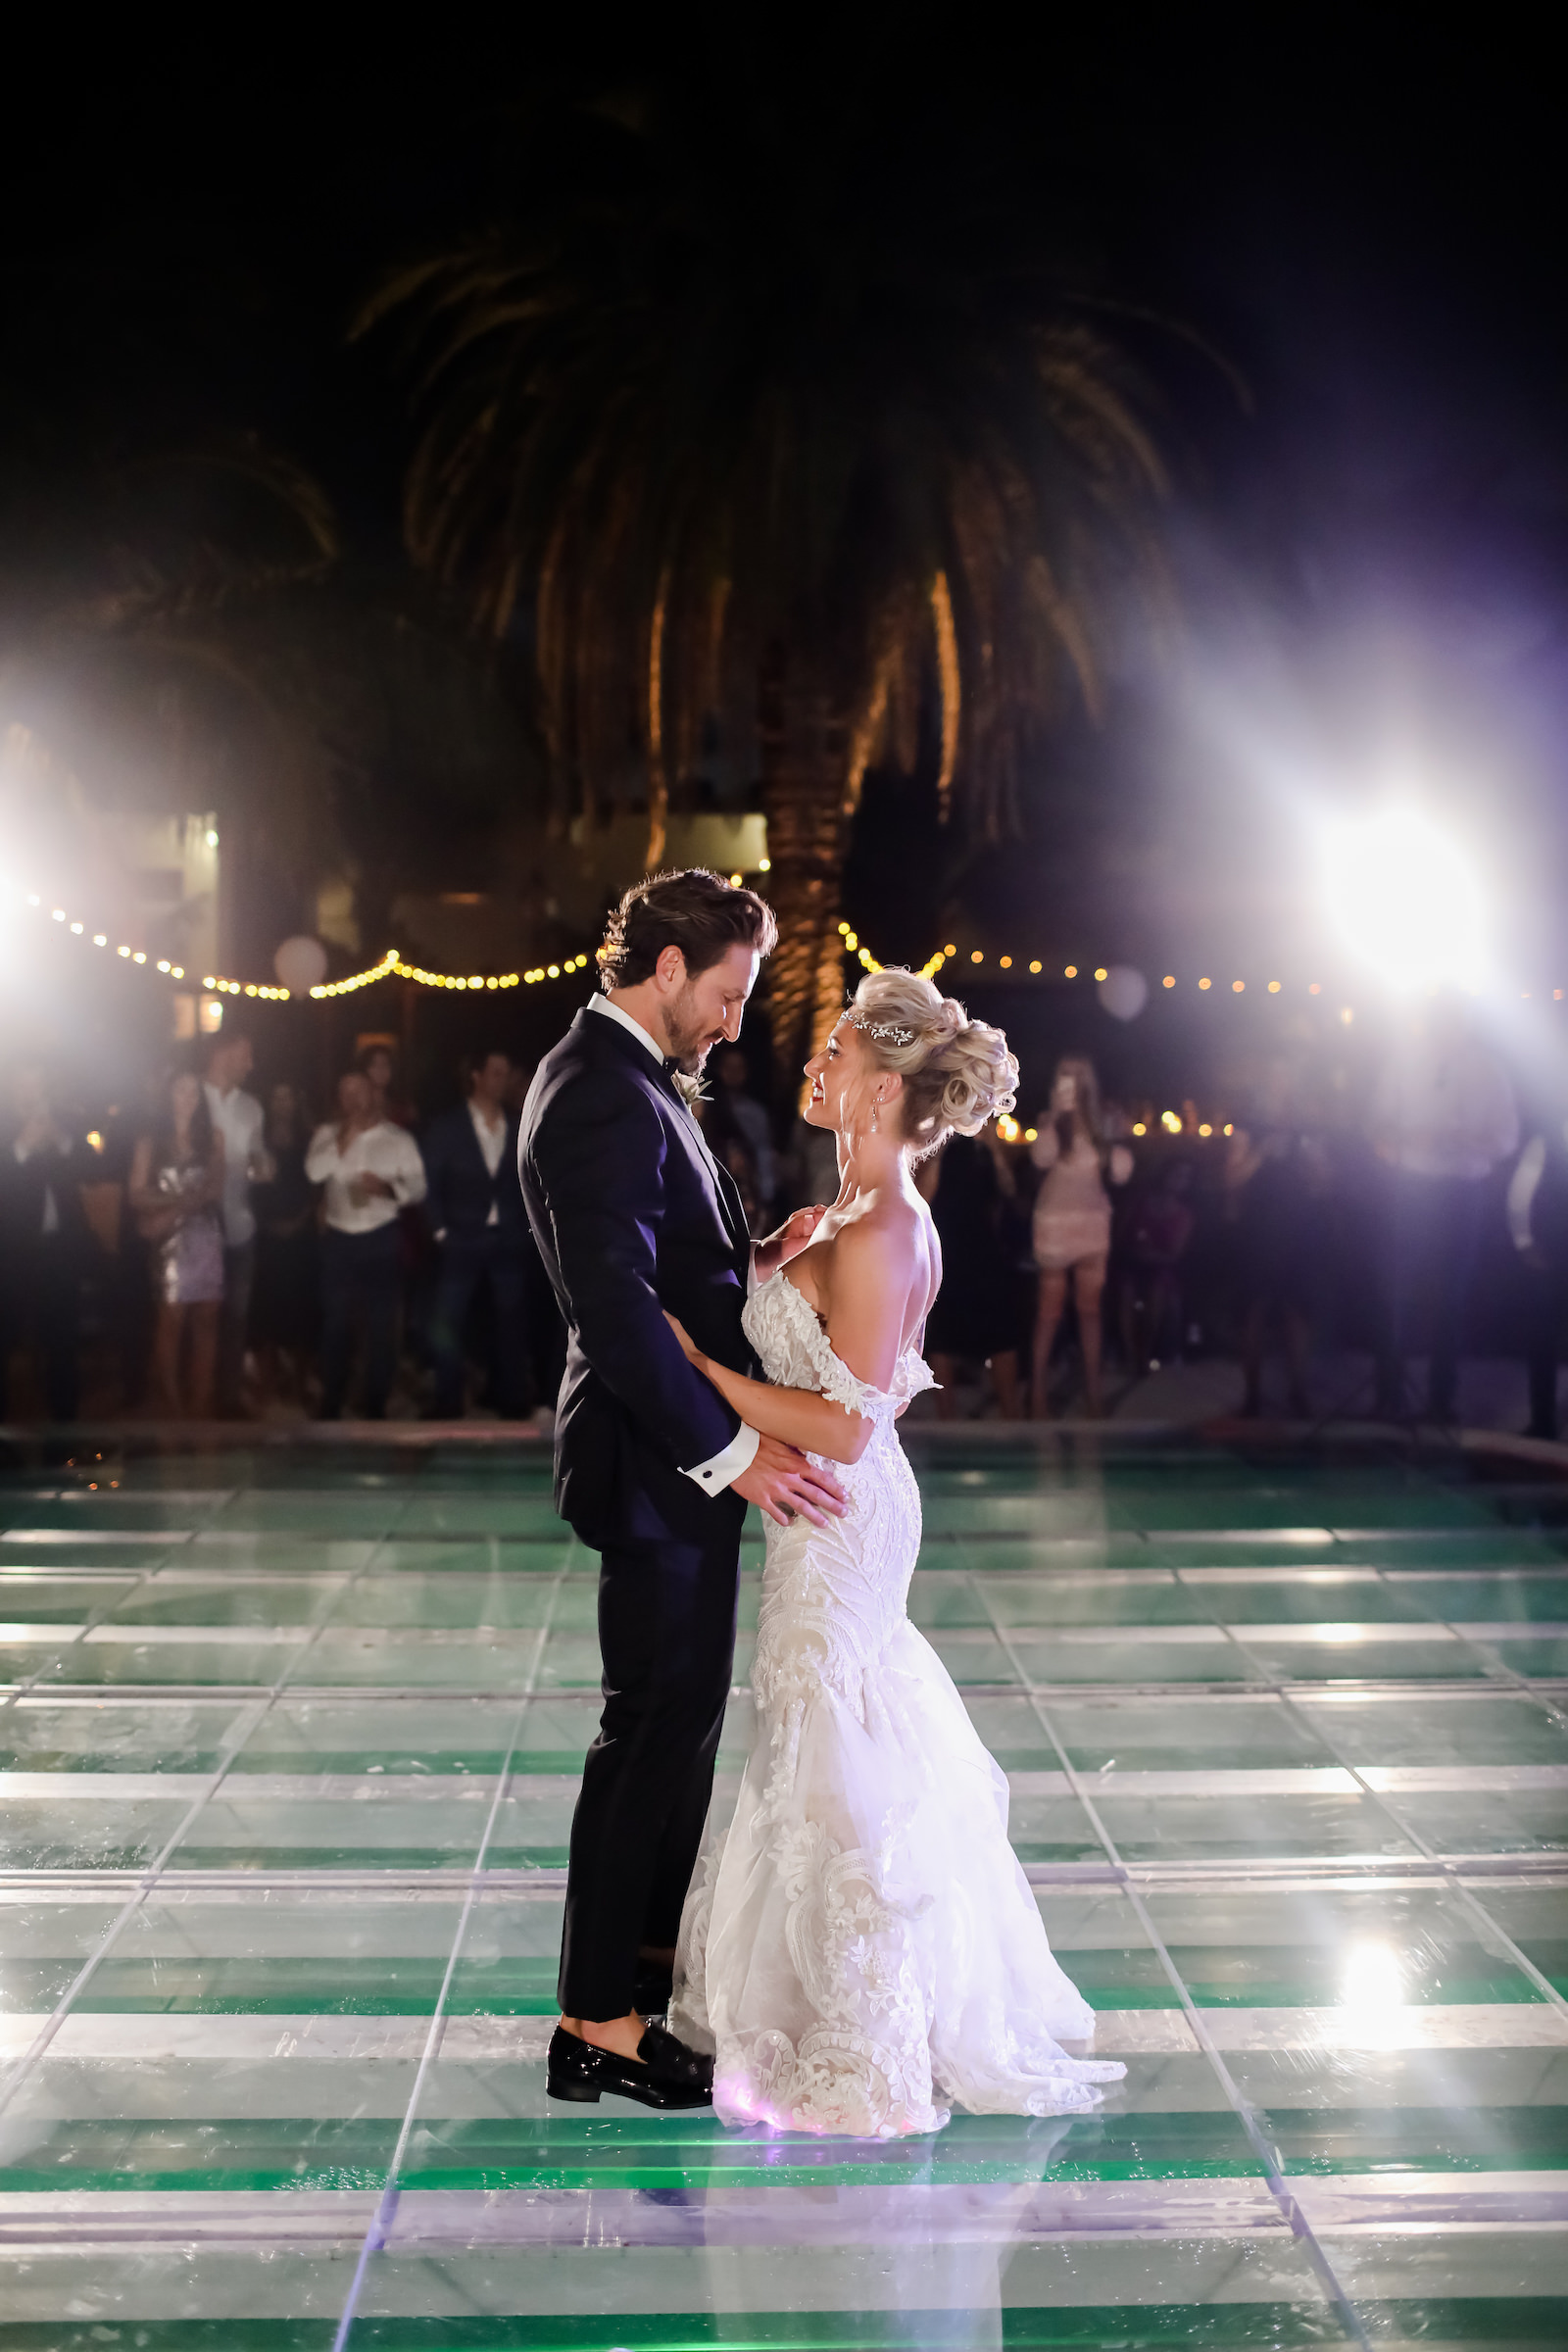 Tropical Inspired Wedding Reception with Bride and Groom Dancing on Acrylic Floor Covering Pool | Sarasota Wedding Planner Kelly Kennedy Weddings | Florida Wedding Photographer Lifelong Photography Studios